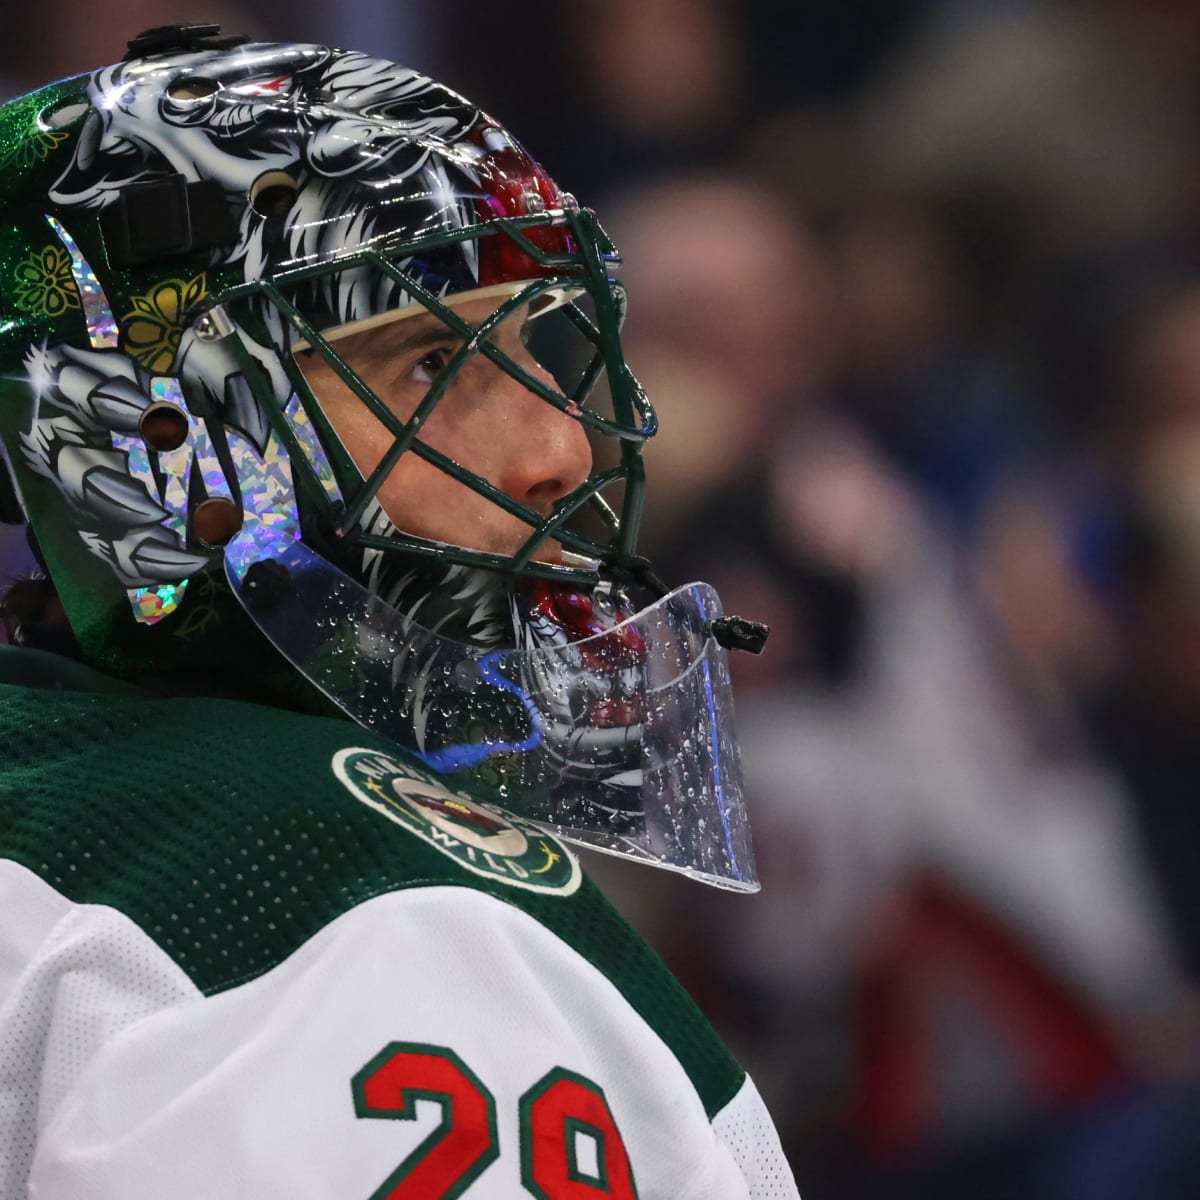 Minnesota Wild re-sign Marc-Andre Fleury to two-year contract with